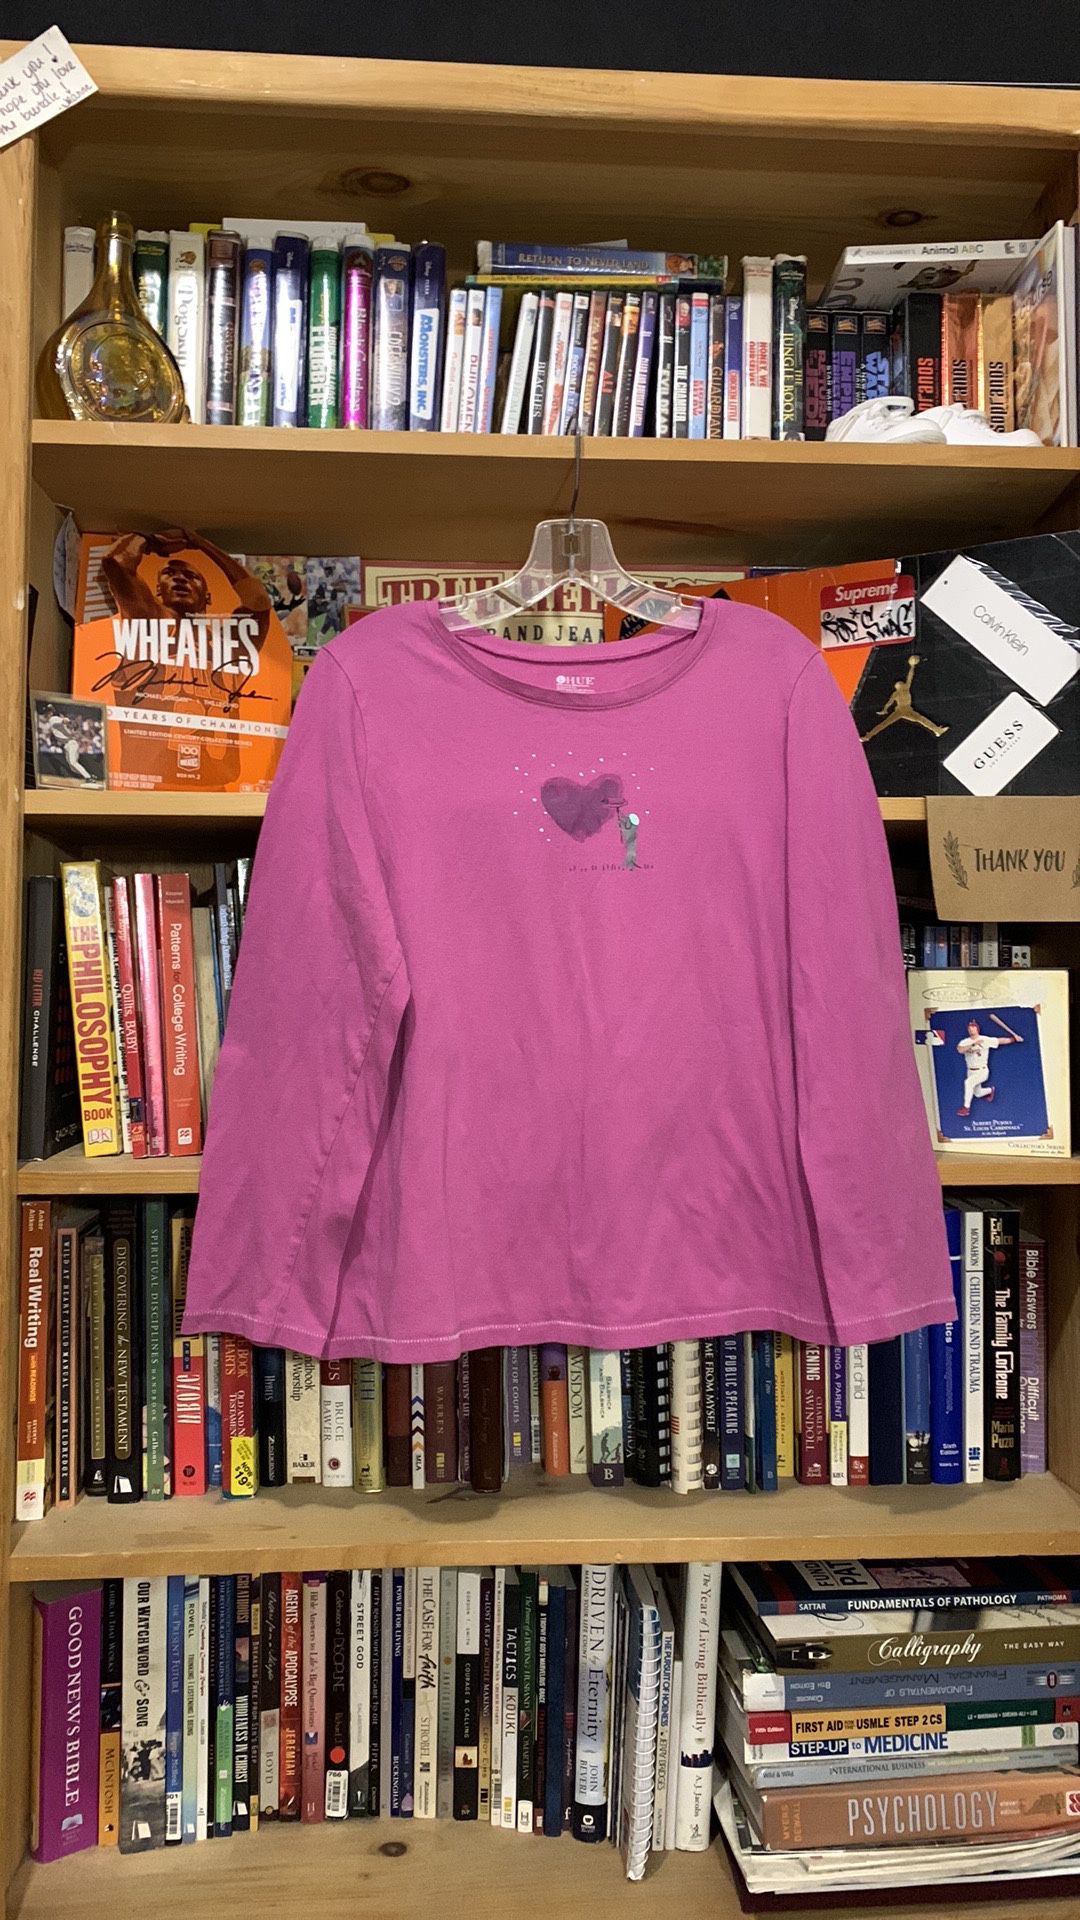 HUE-women’s violet long sleeve ‘dog painting heart/bedazzle’ graphic tee-shirt